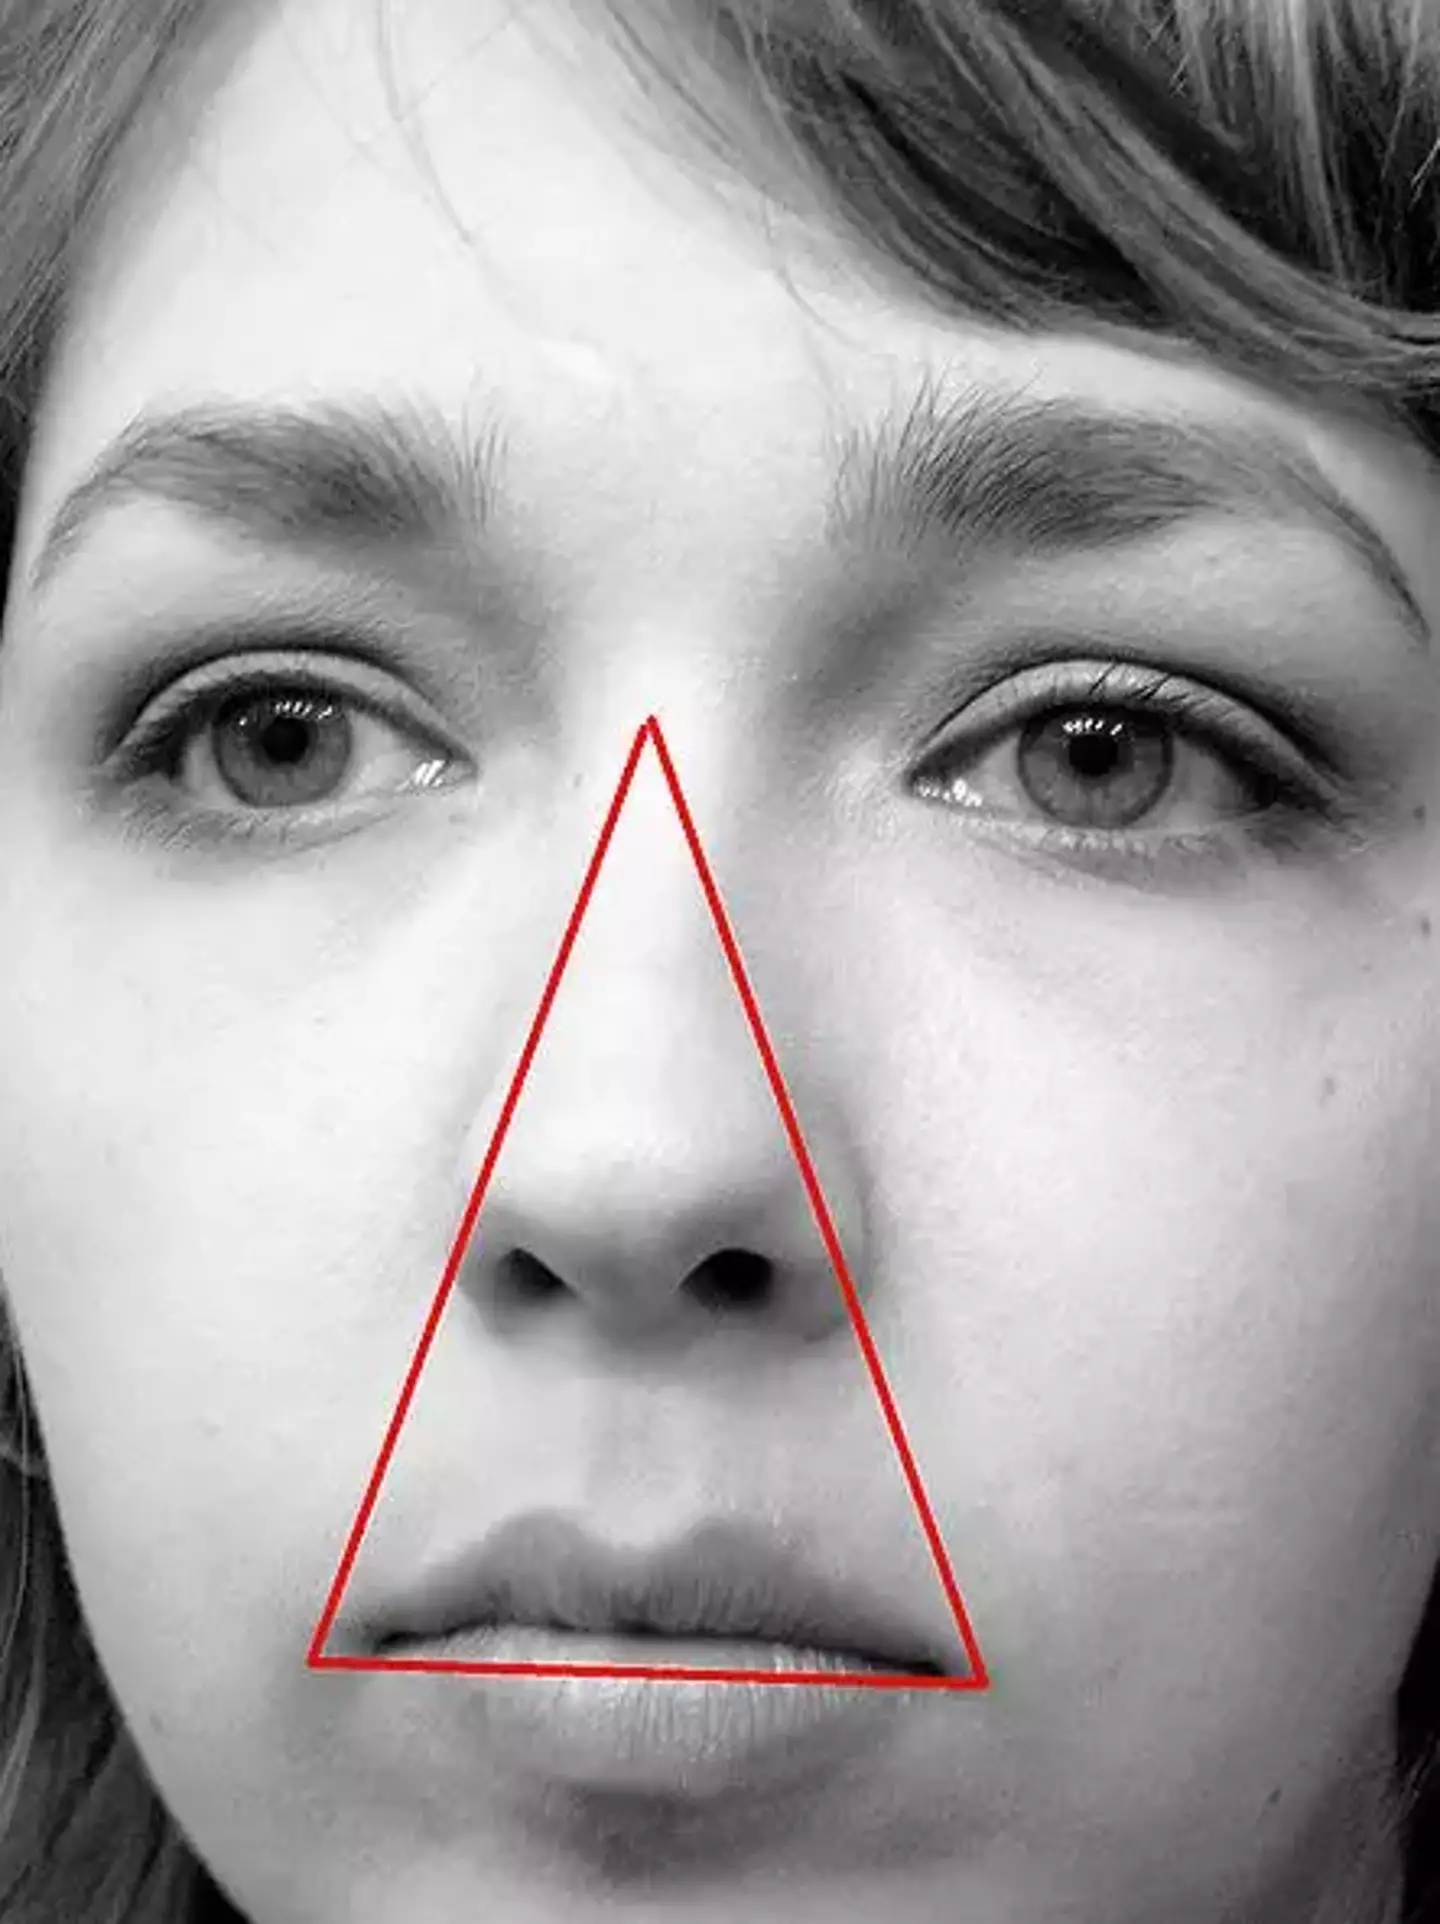 It has been claimed that the triangle is dangerous to mess with.